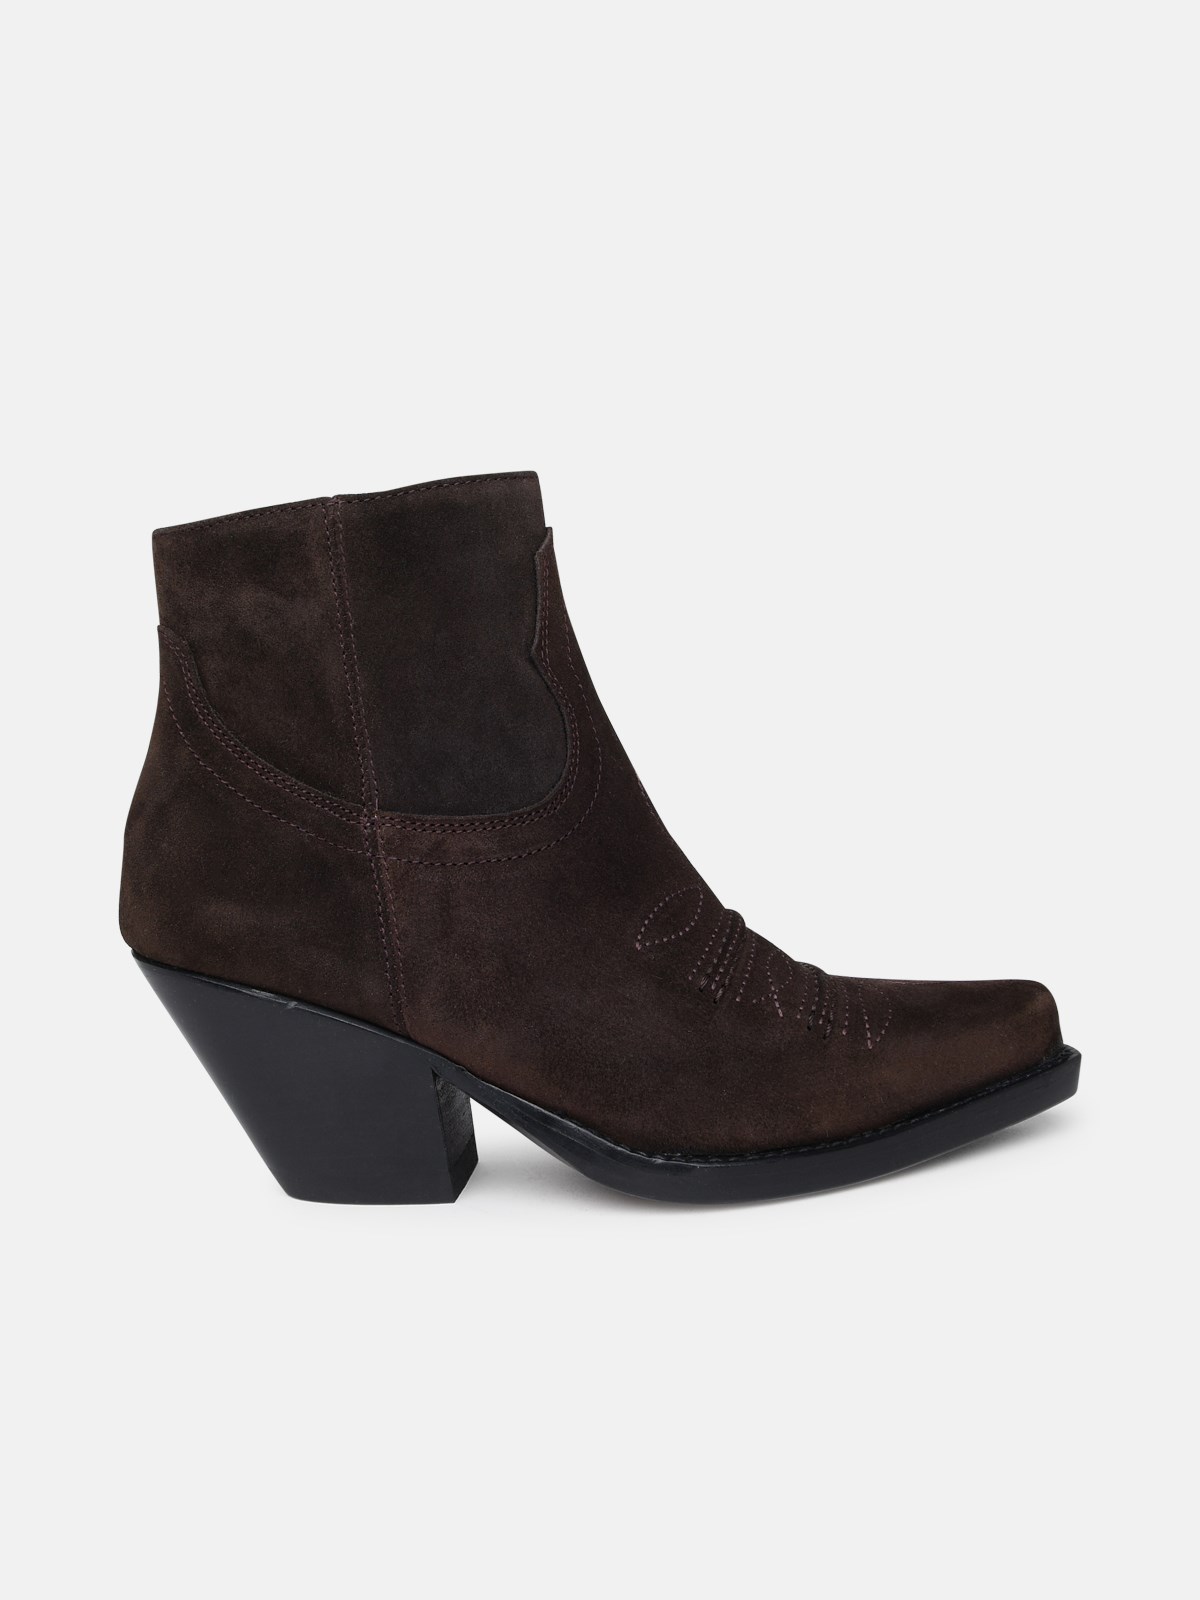 Sonora Jalapeno Ankle Boots In Brown Suede